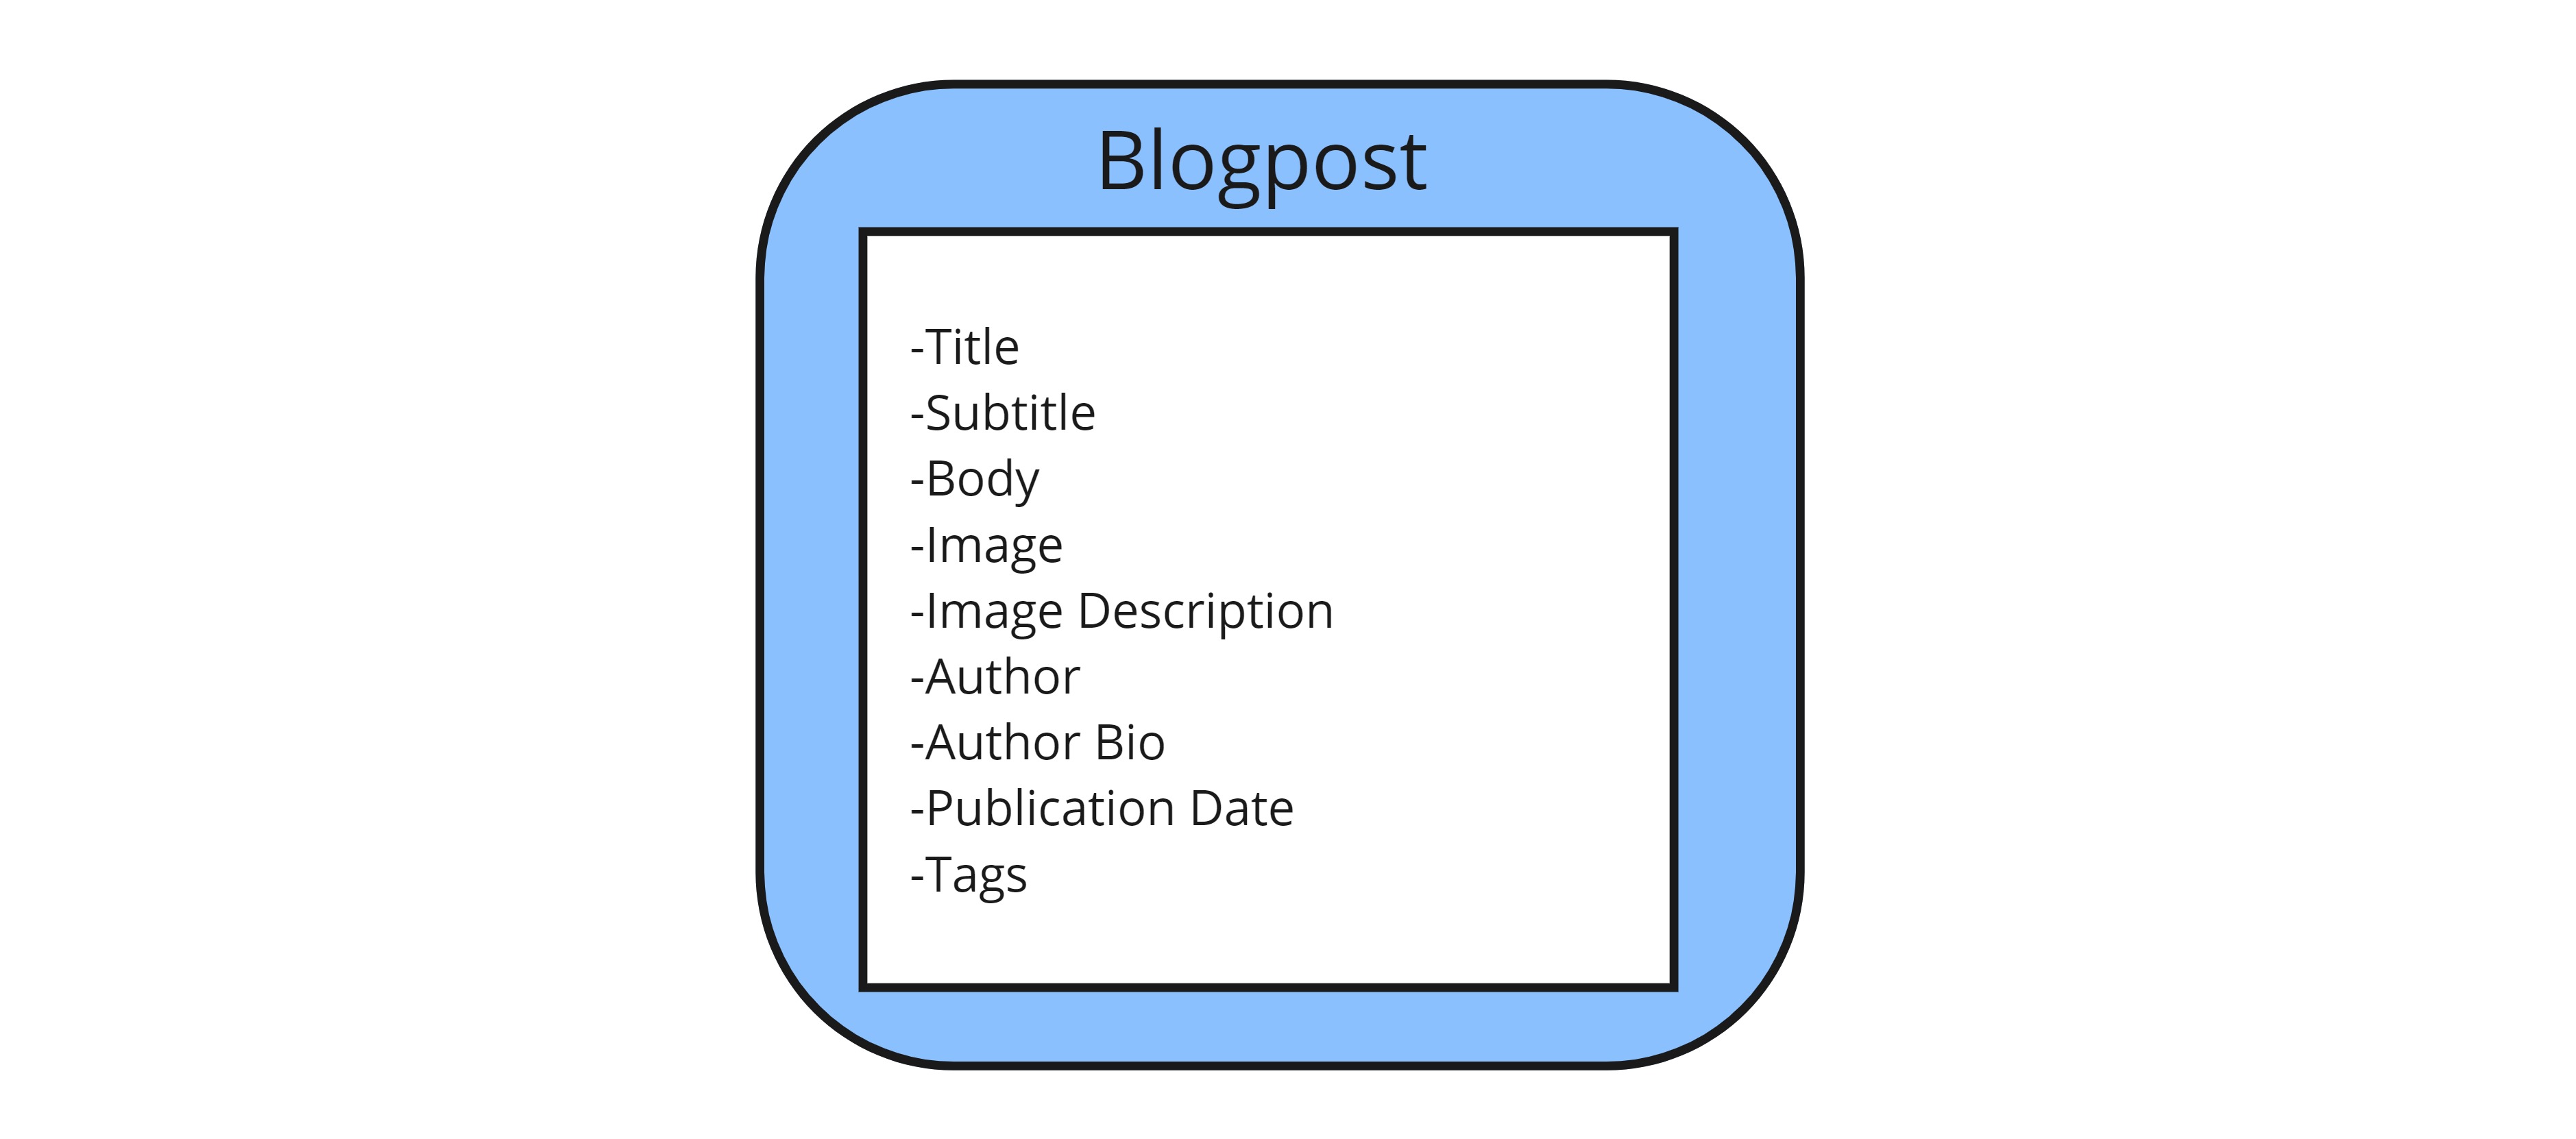 An example of a poorly structured Blog Post consisting of a single large Content Type